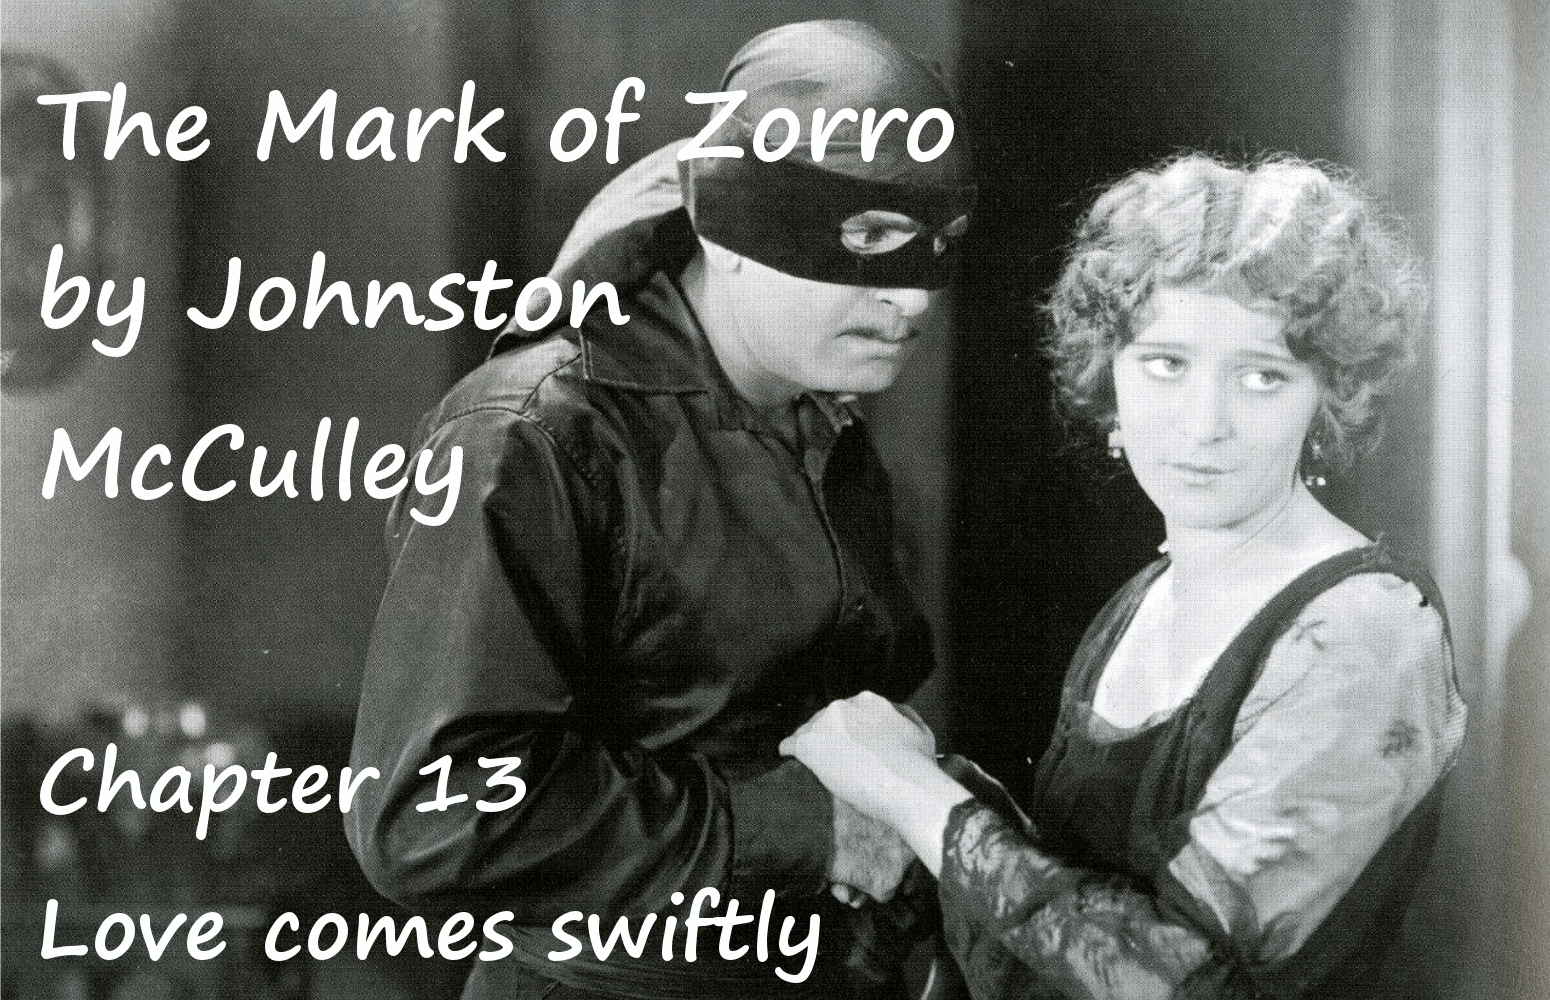 The Mark of Zorro chapter 13 Love comes swiftly by Johnston McCulley